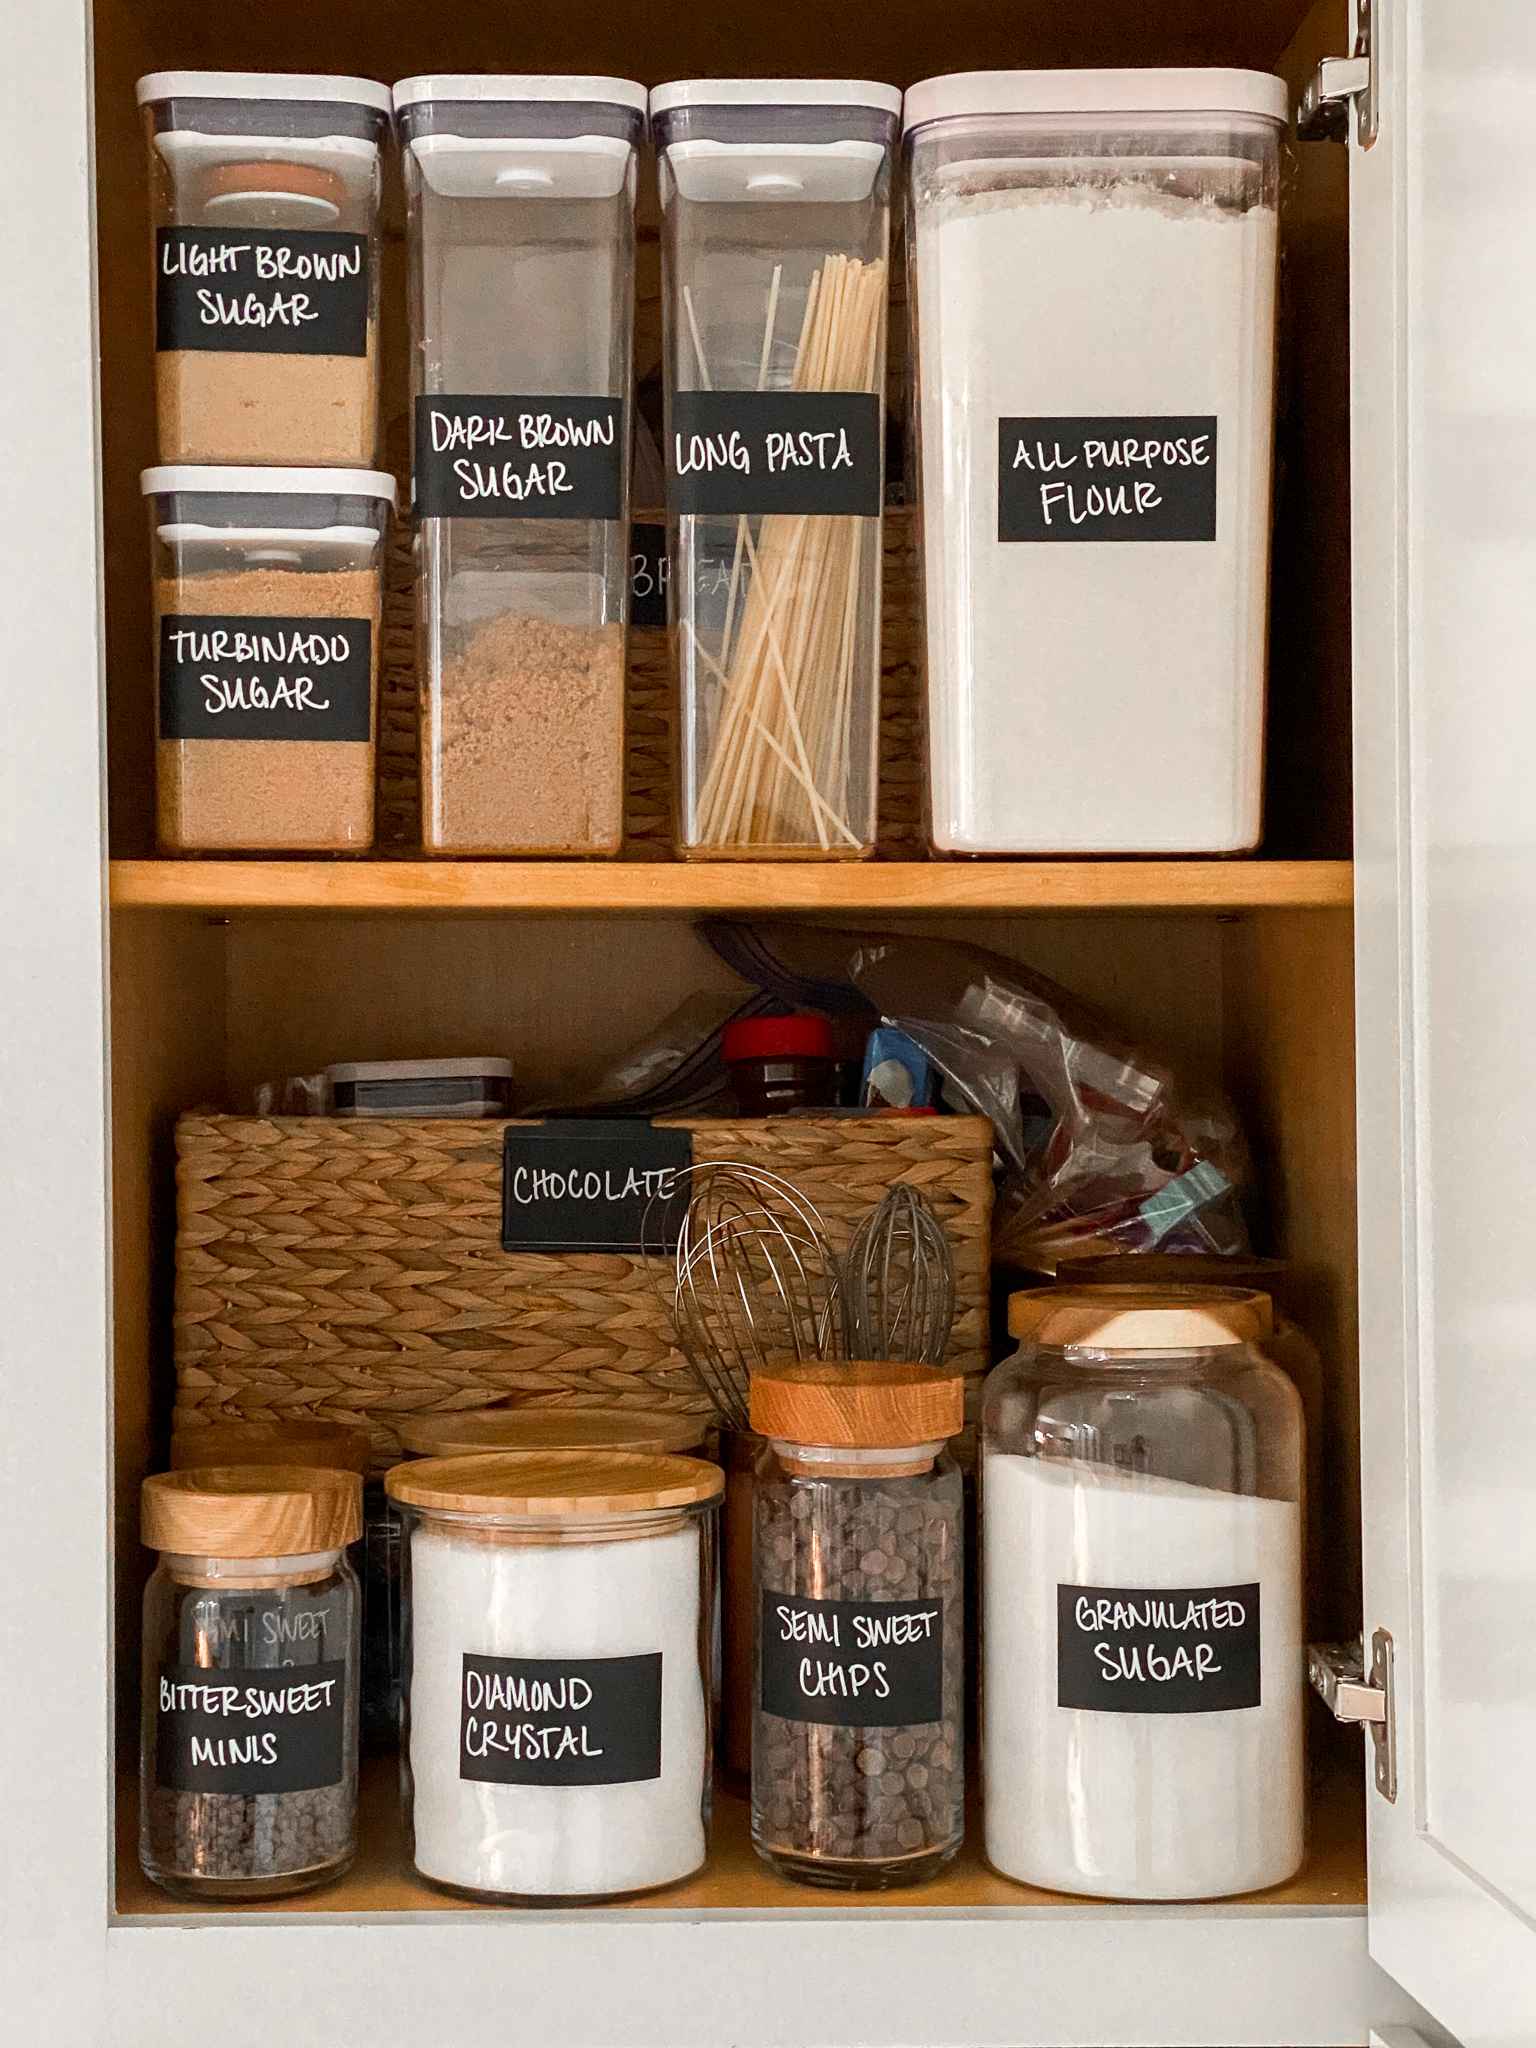 Organising a kitchen pantry with deep shelves  Deep pantry organization,  Kitchen organization pantry, Deep pantry